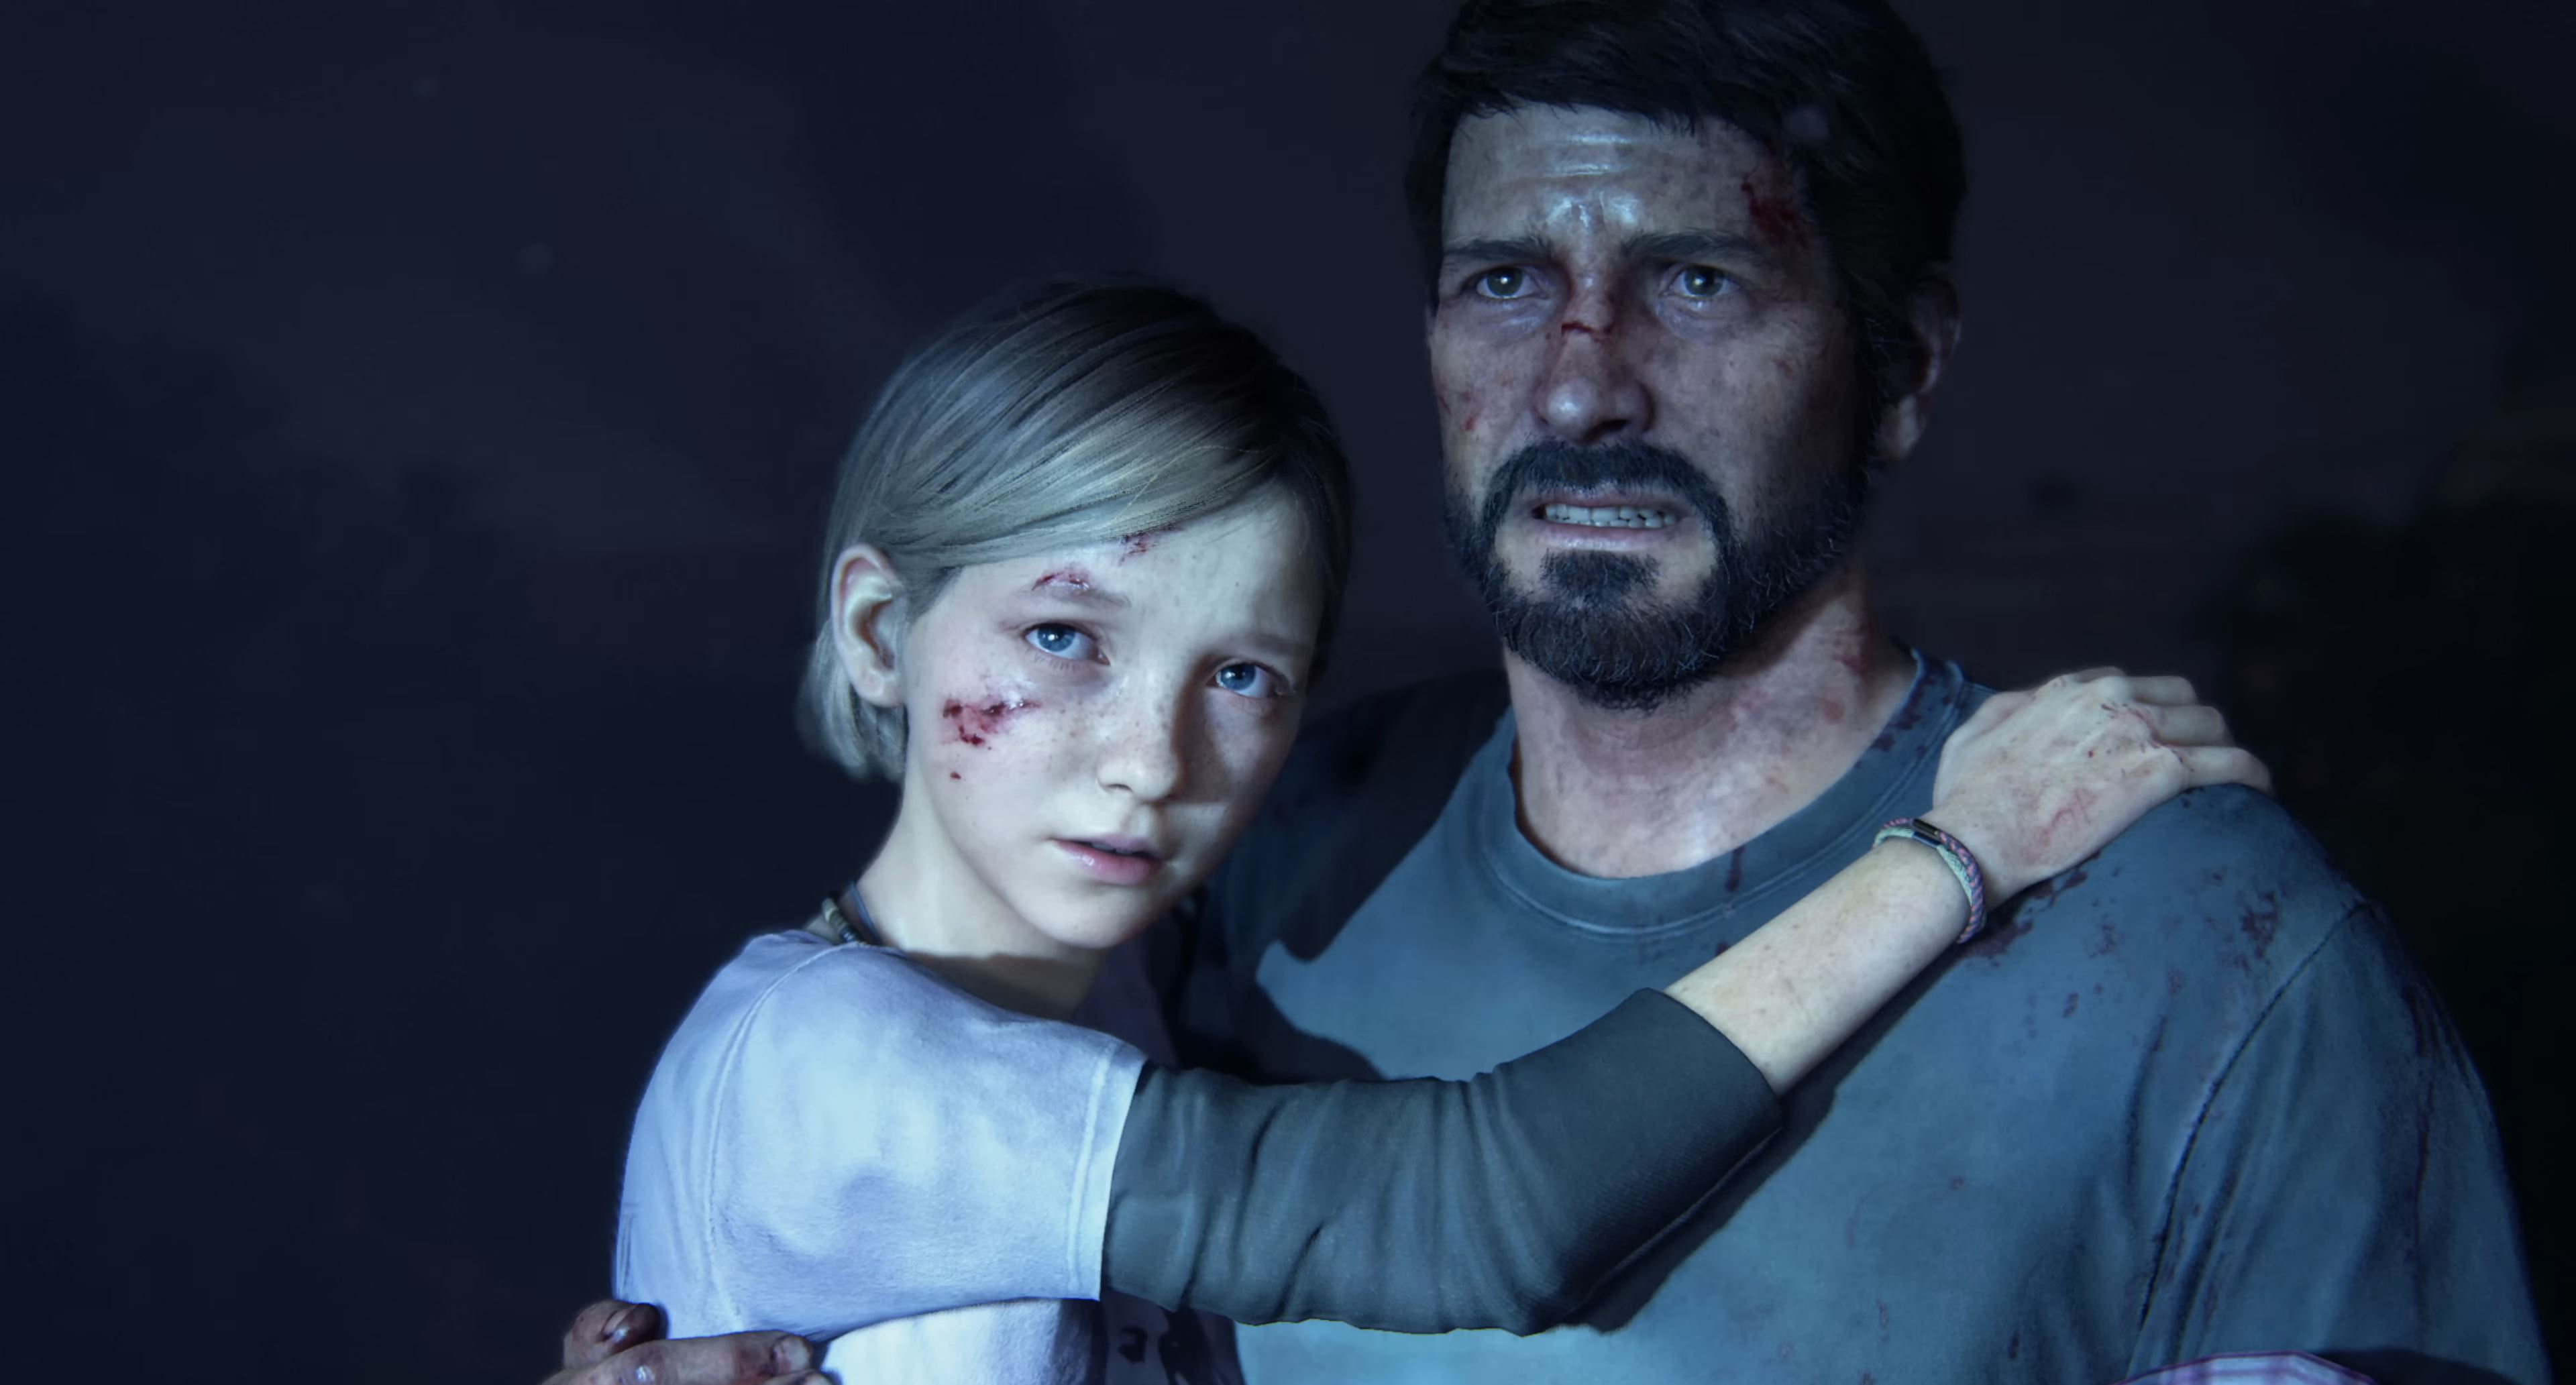 The Last of Us™ Part II - ELLIE & TOMMY AFTER JOEL'S DEATH